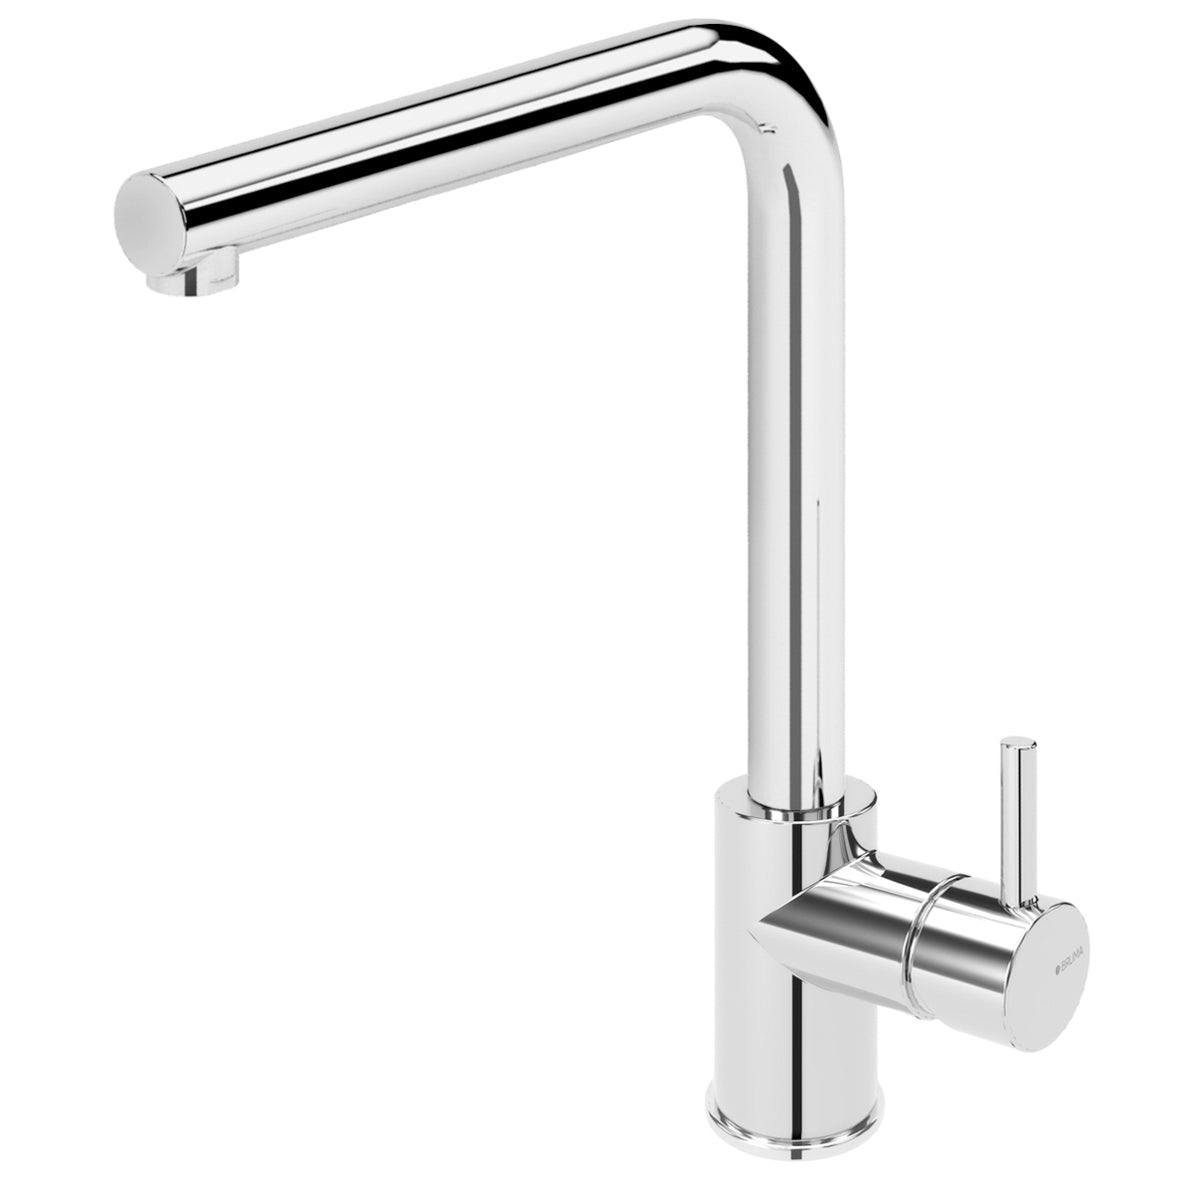 Chrome Kitchen Mixer Tap with swivel spout - Great Value - Letta London - 